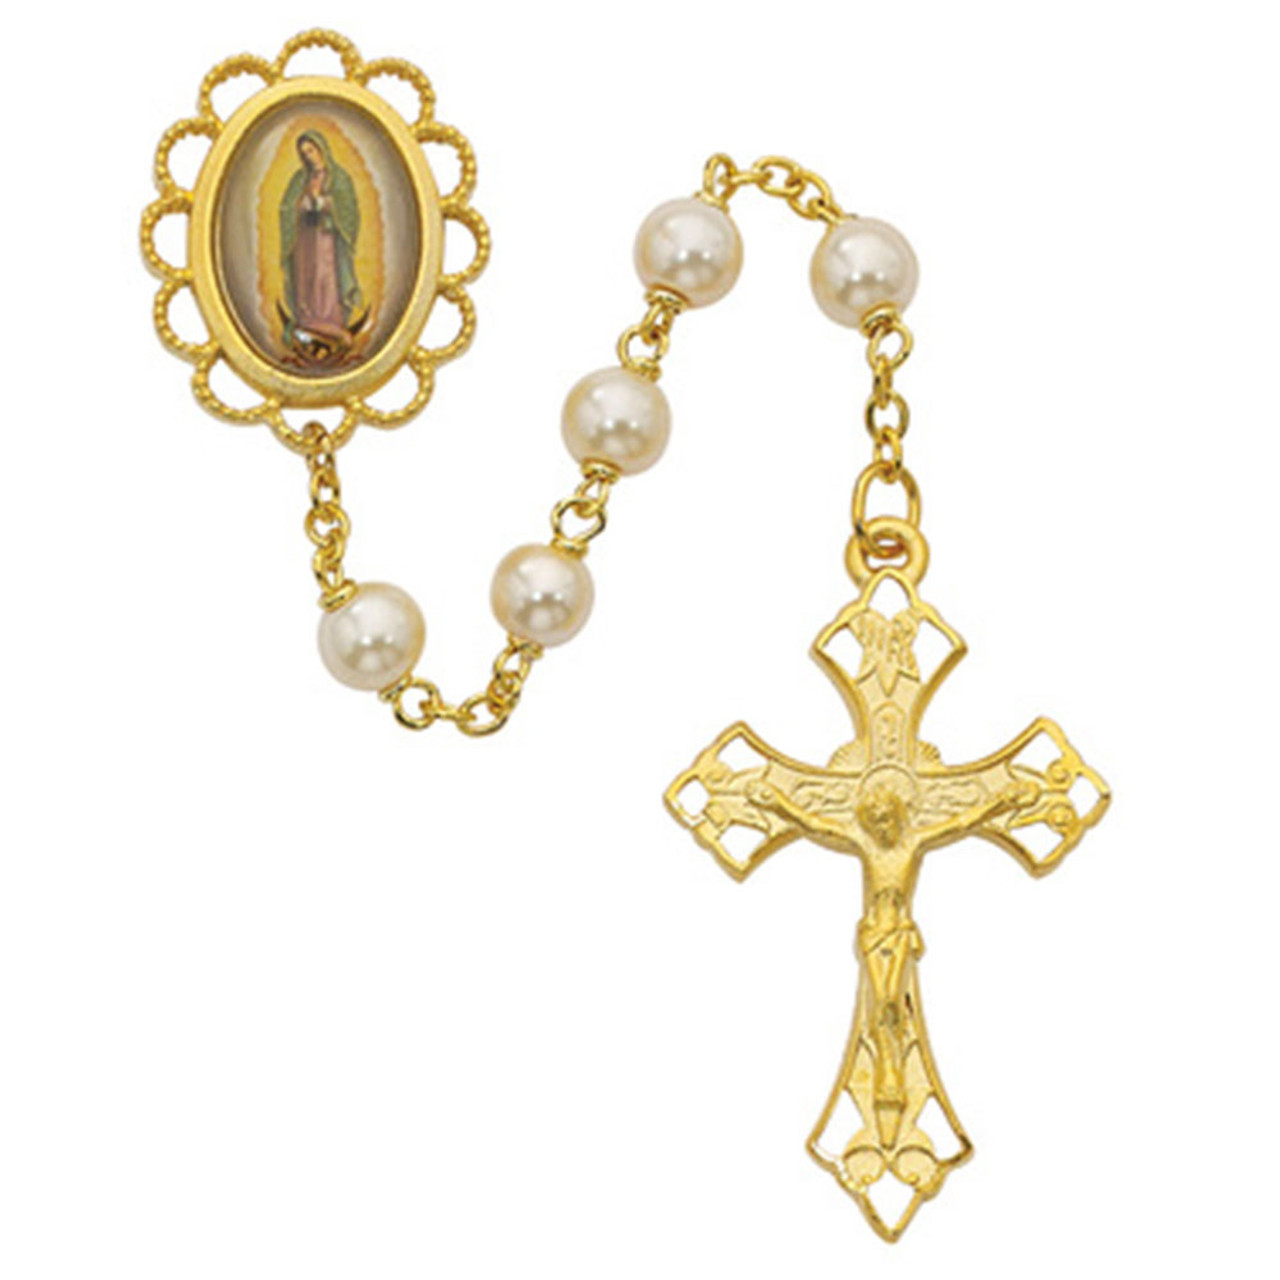 Collectible Our Lady of Guadalupe Rosary